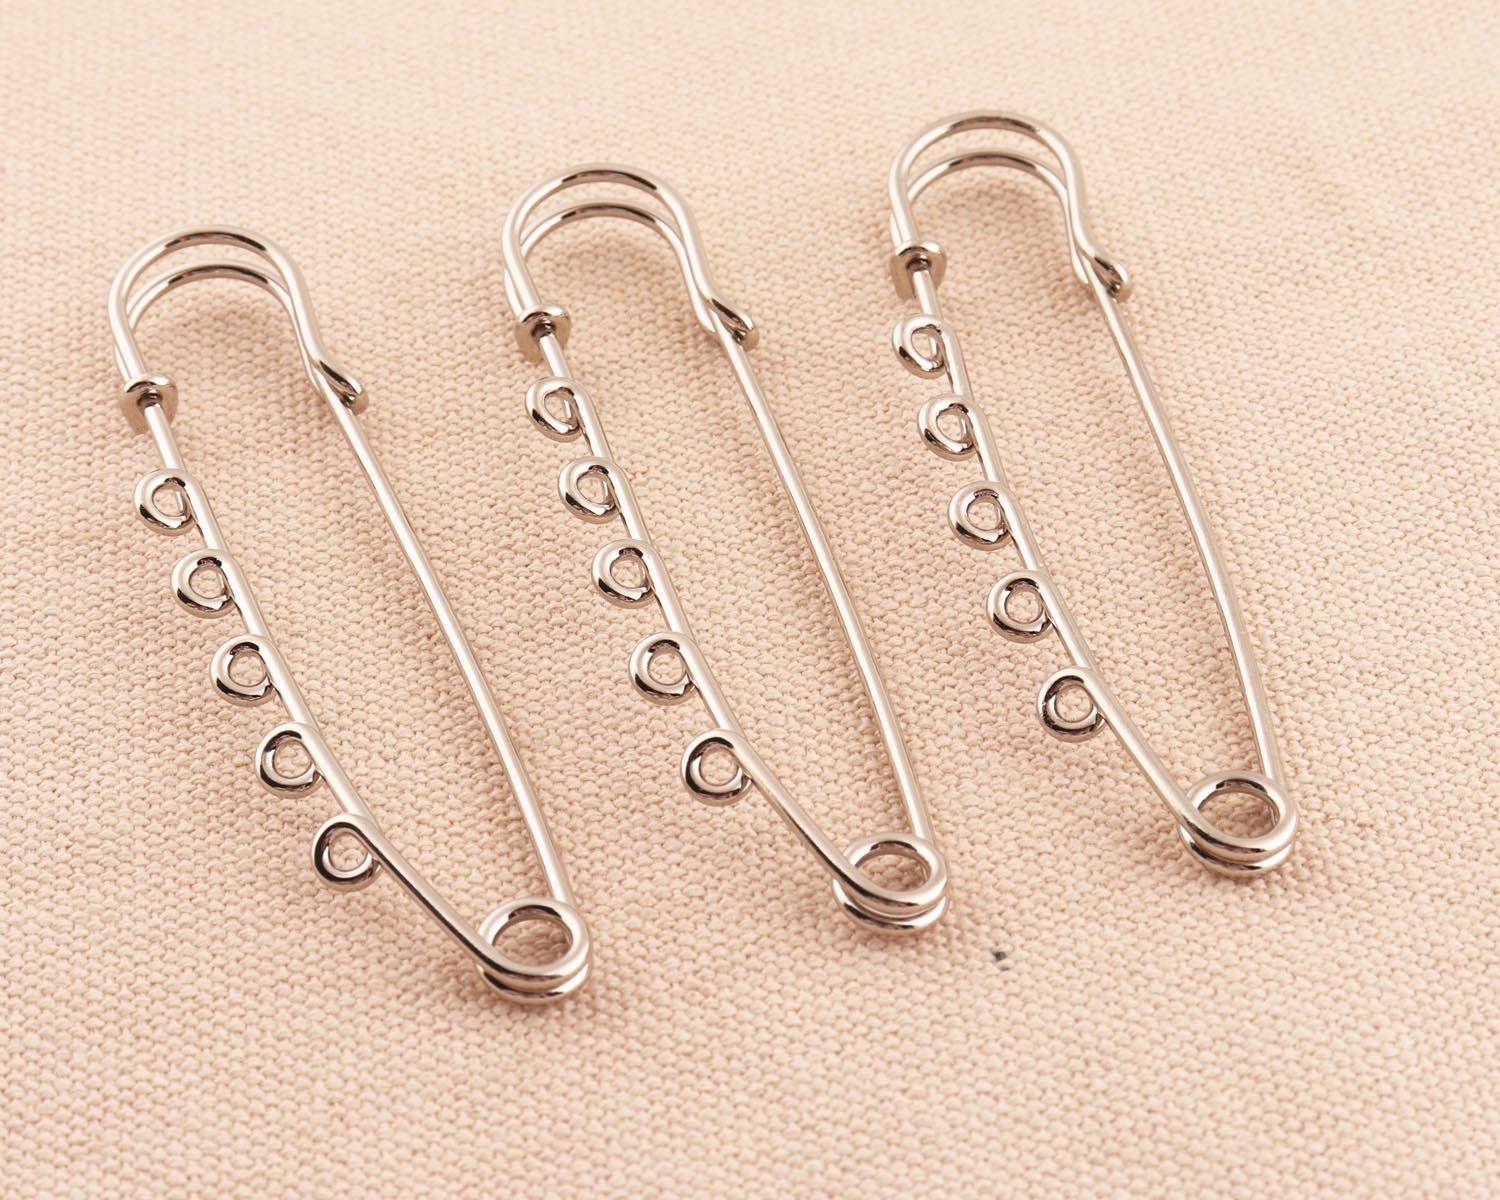 Safety Pin Earrings,hypoallergenic Stainless Steel Gold Minimal Hoop  Earrings Fashionable Simple Safety Pin for Clothes/tag,two Size 